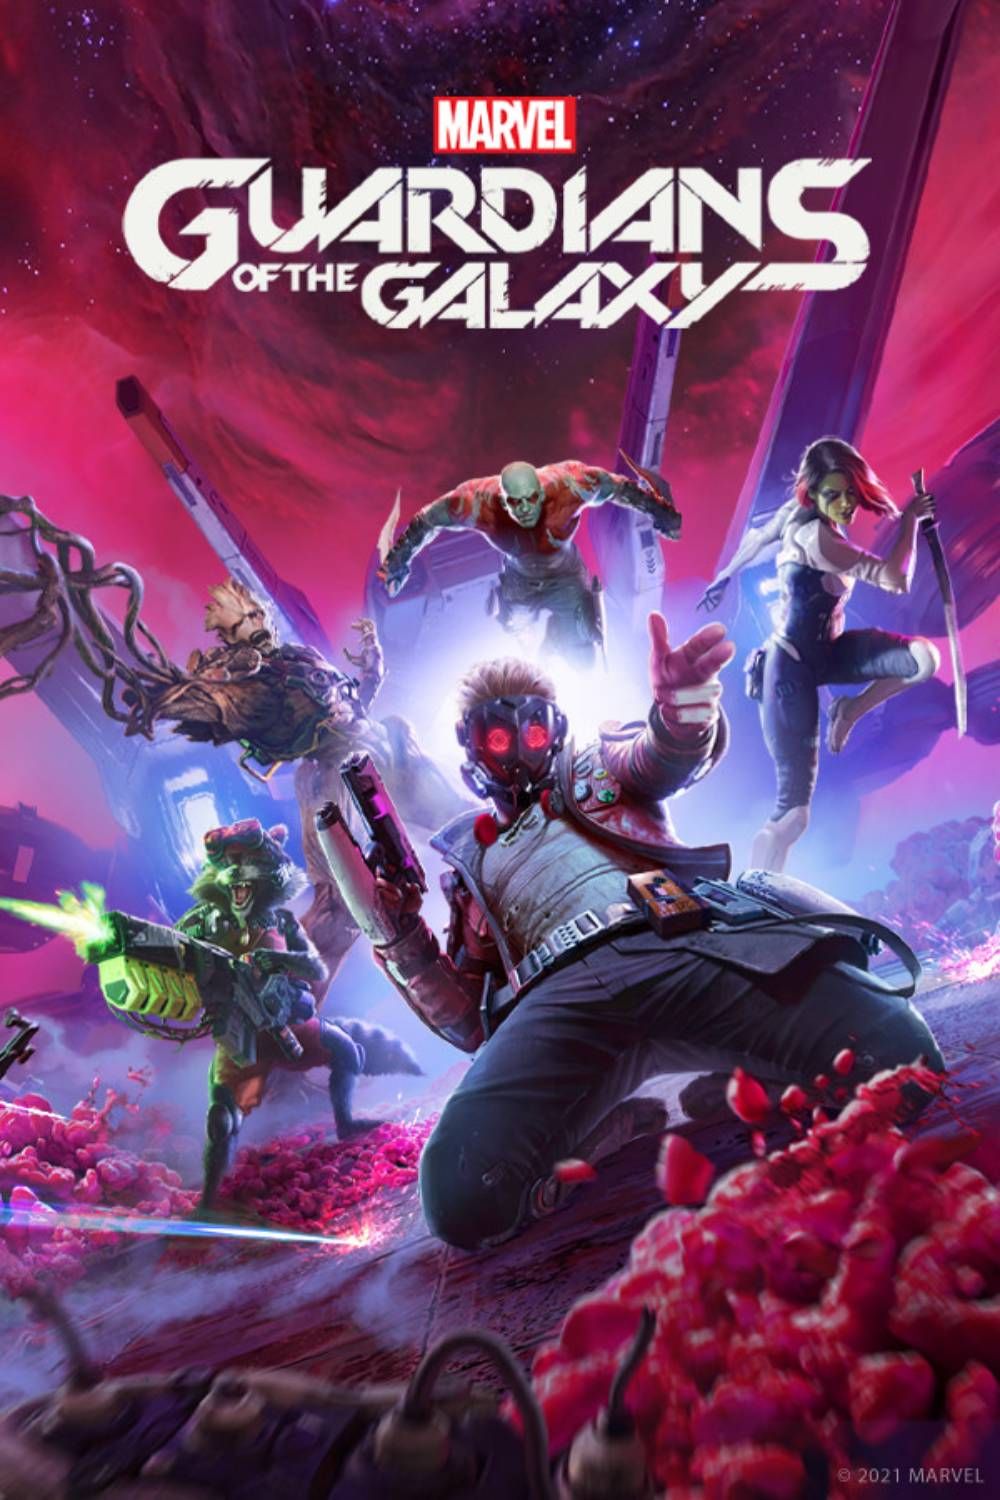 Marvel's Guardians of the Galaxy Cover Art